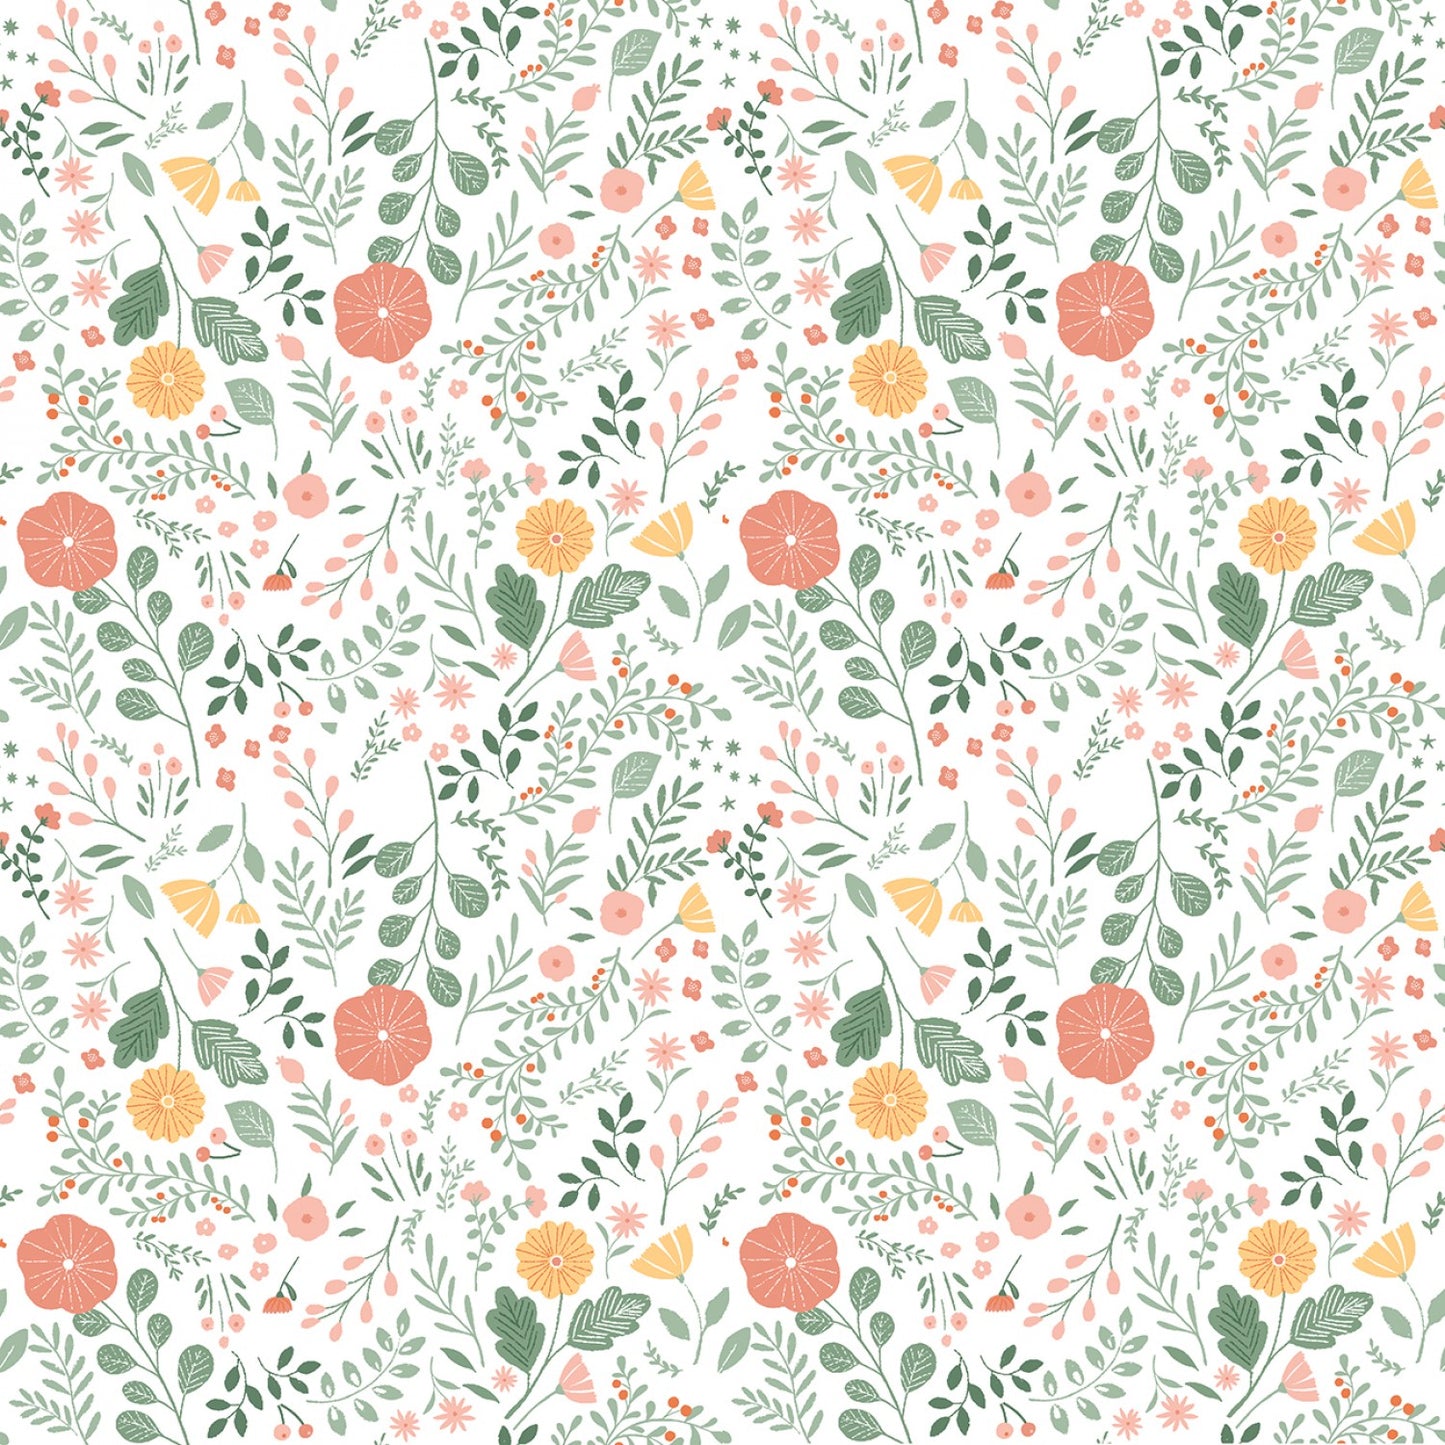 Sew Lovely - Cotton Fabric